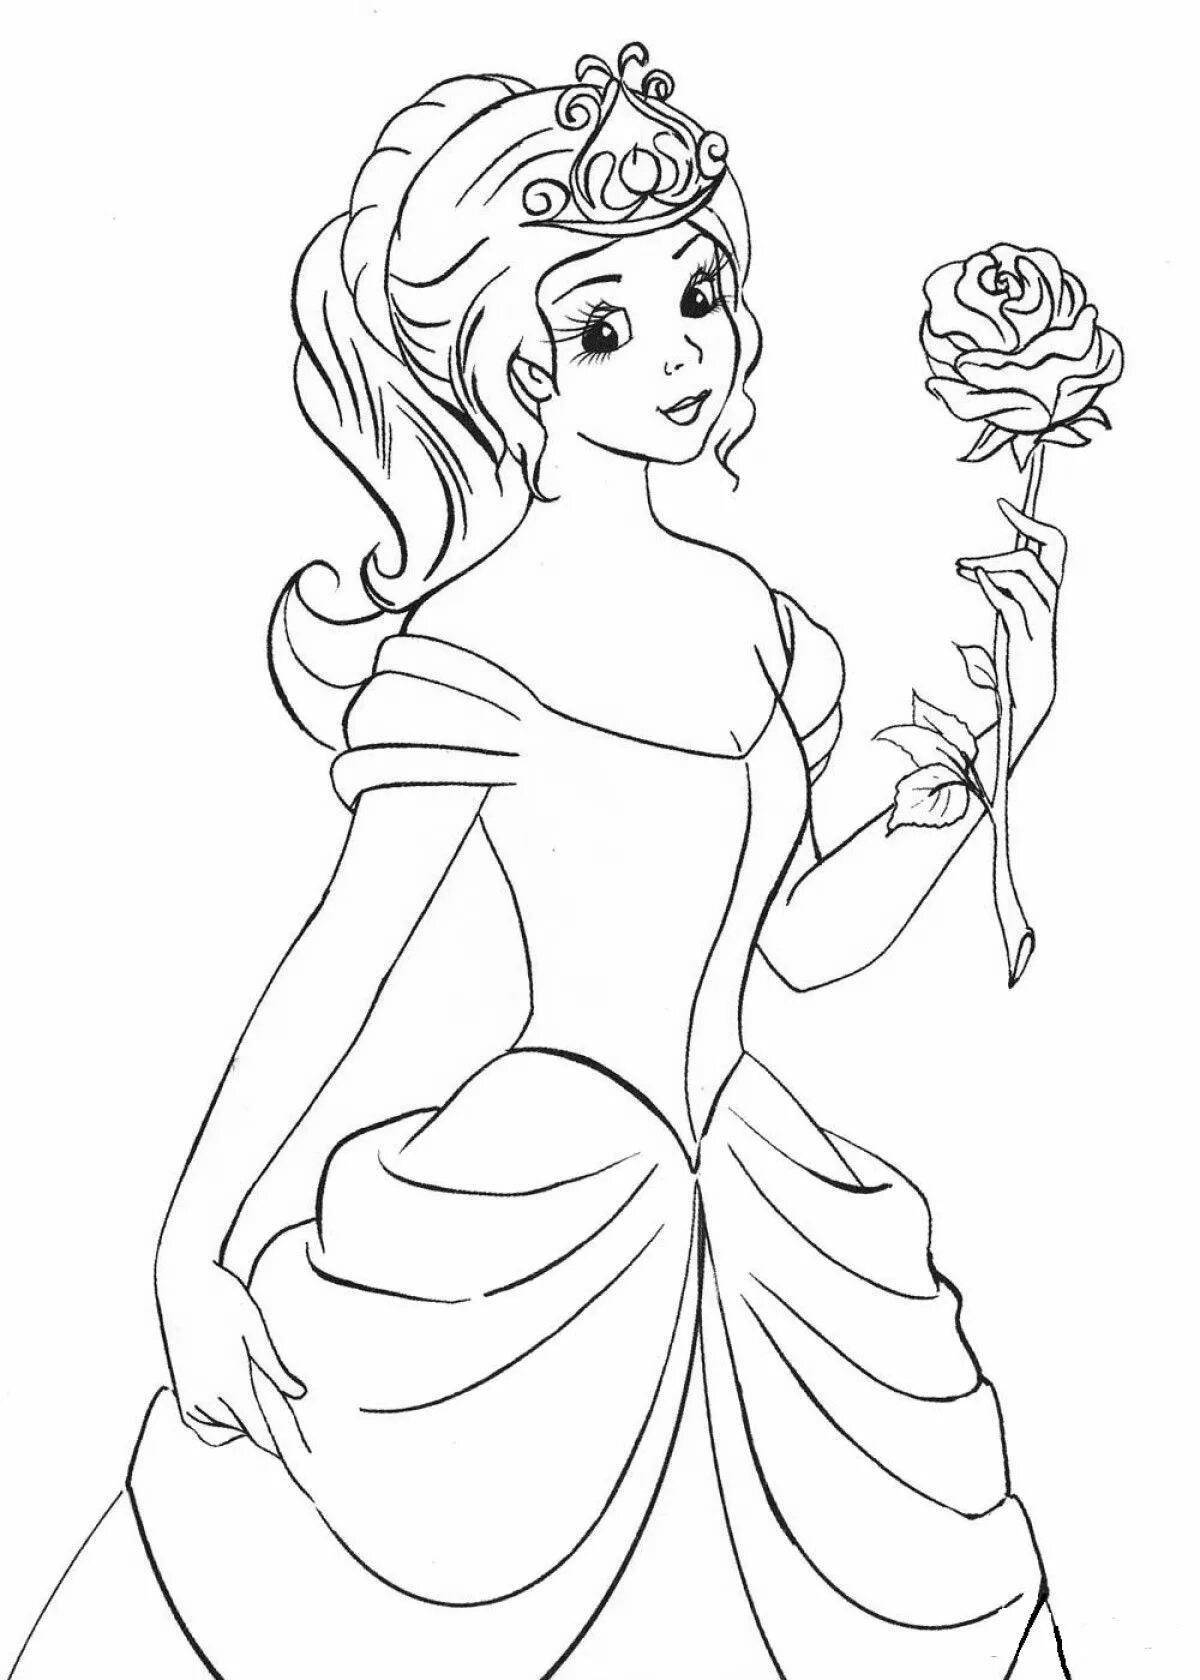 Awesome princess coloring page